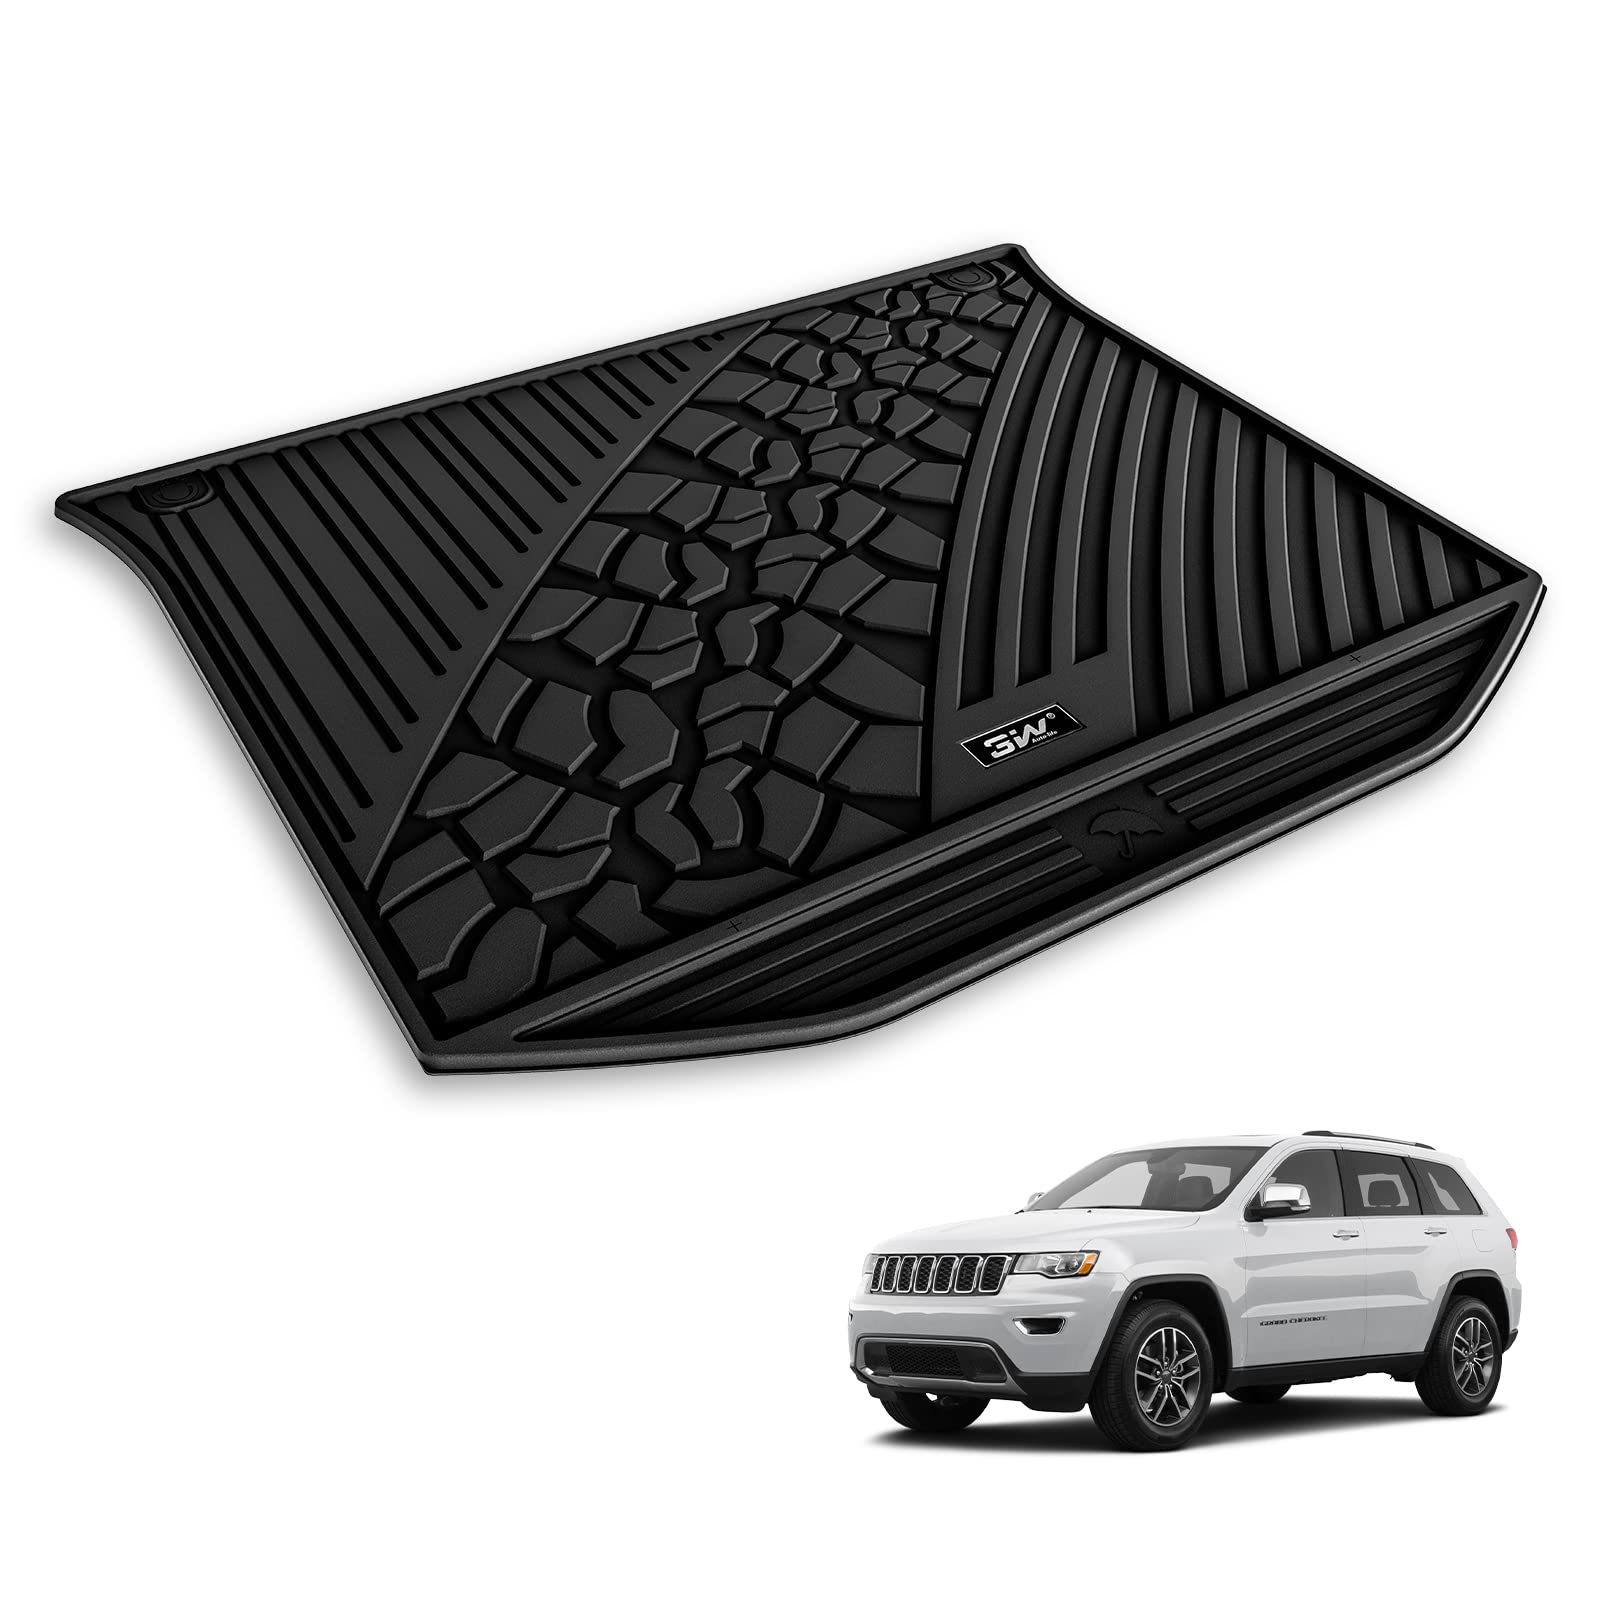 3W Floor Mats Jeep Grand Cherokee 2016-2021 / Grand Cherokee WK 2022-2023 (Non L) Custom Cargo Liner TPE Material & All-Weather Protection Vehicles & Parts 3W 2016-2021 Grand Cherokee 2016-2021 Trunk Mat